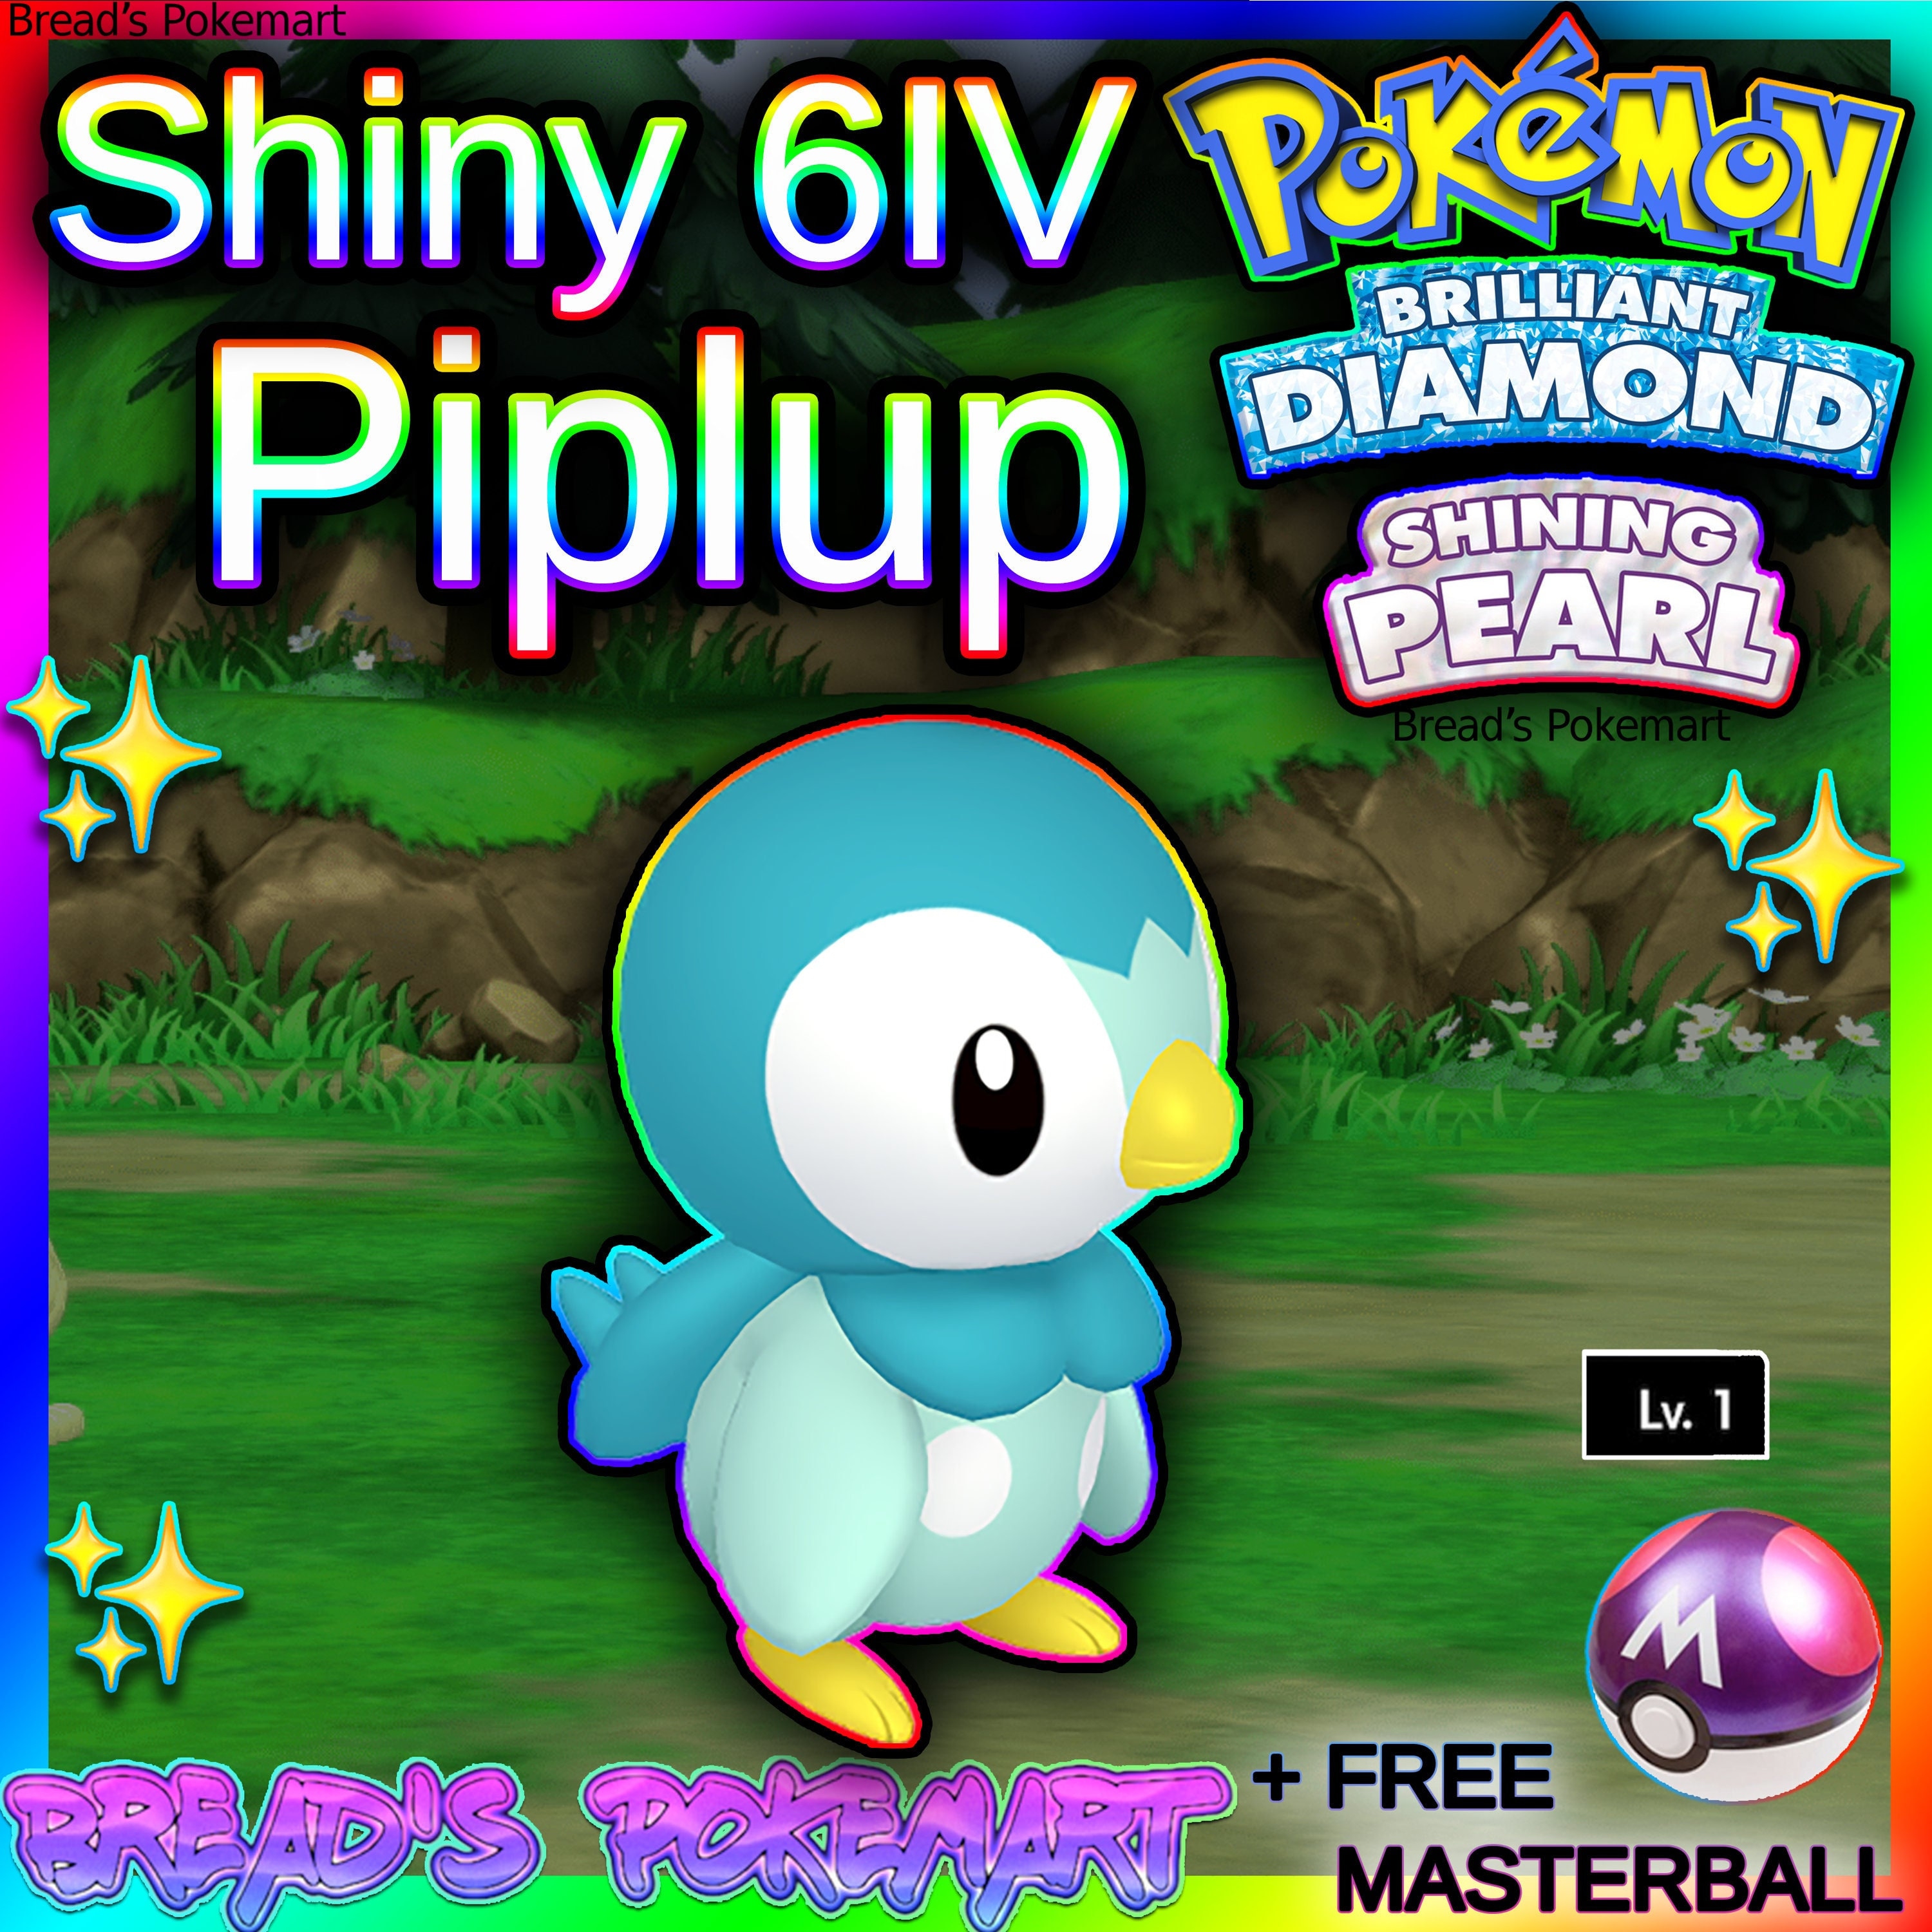 How To Get A Shiny Starter in Pokémon Brilliant Diamond & Shining Pearl